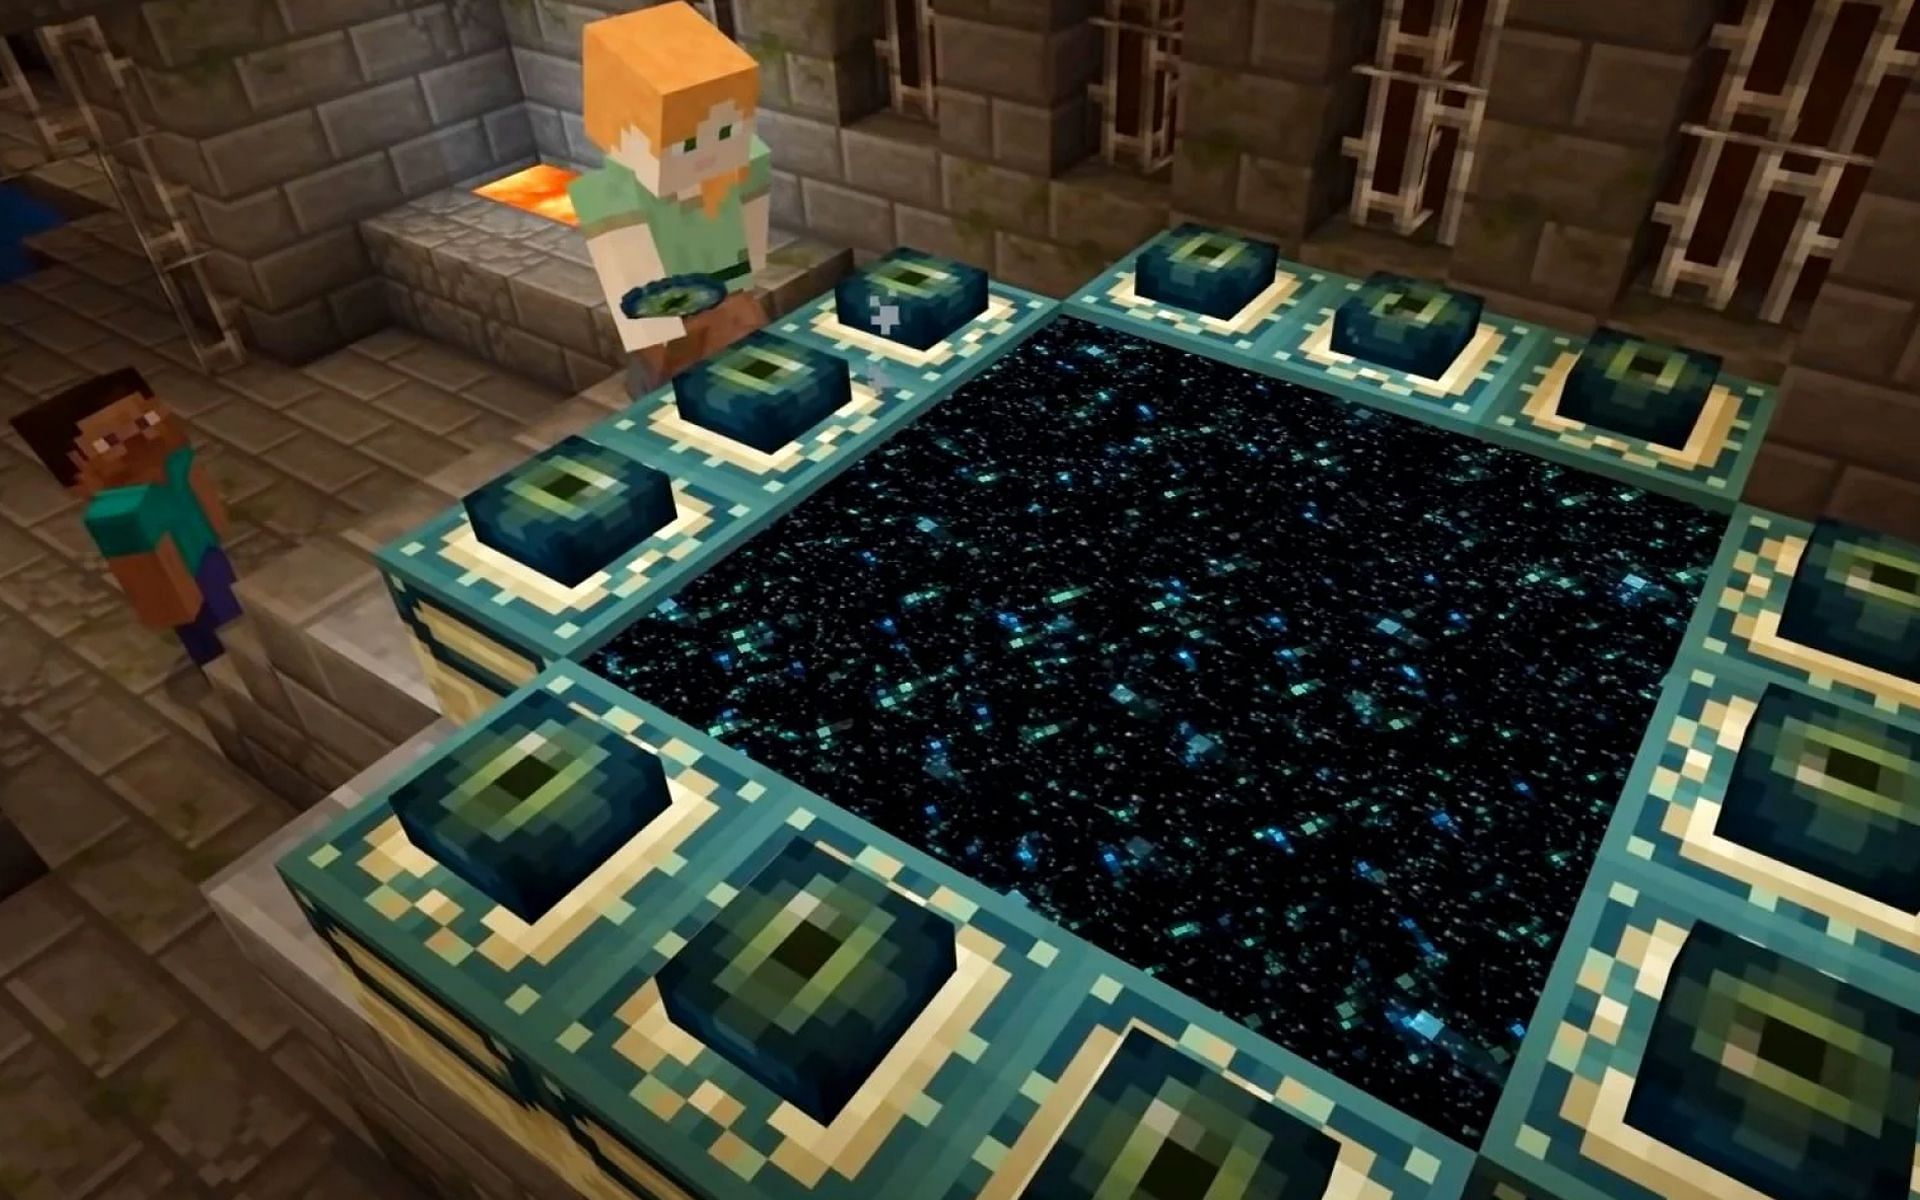 How To Make An End Portal In Minecraft – Minecraft Information